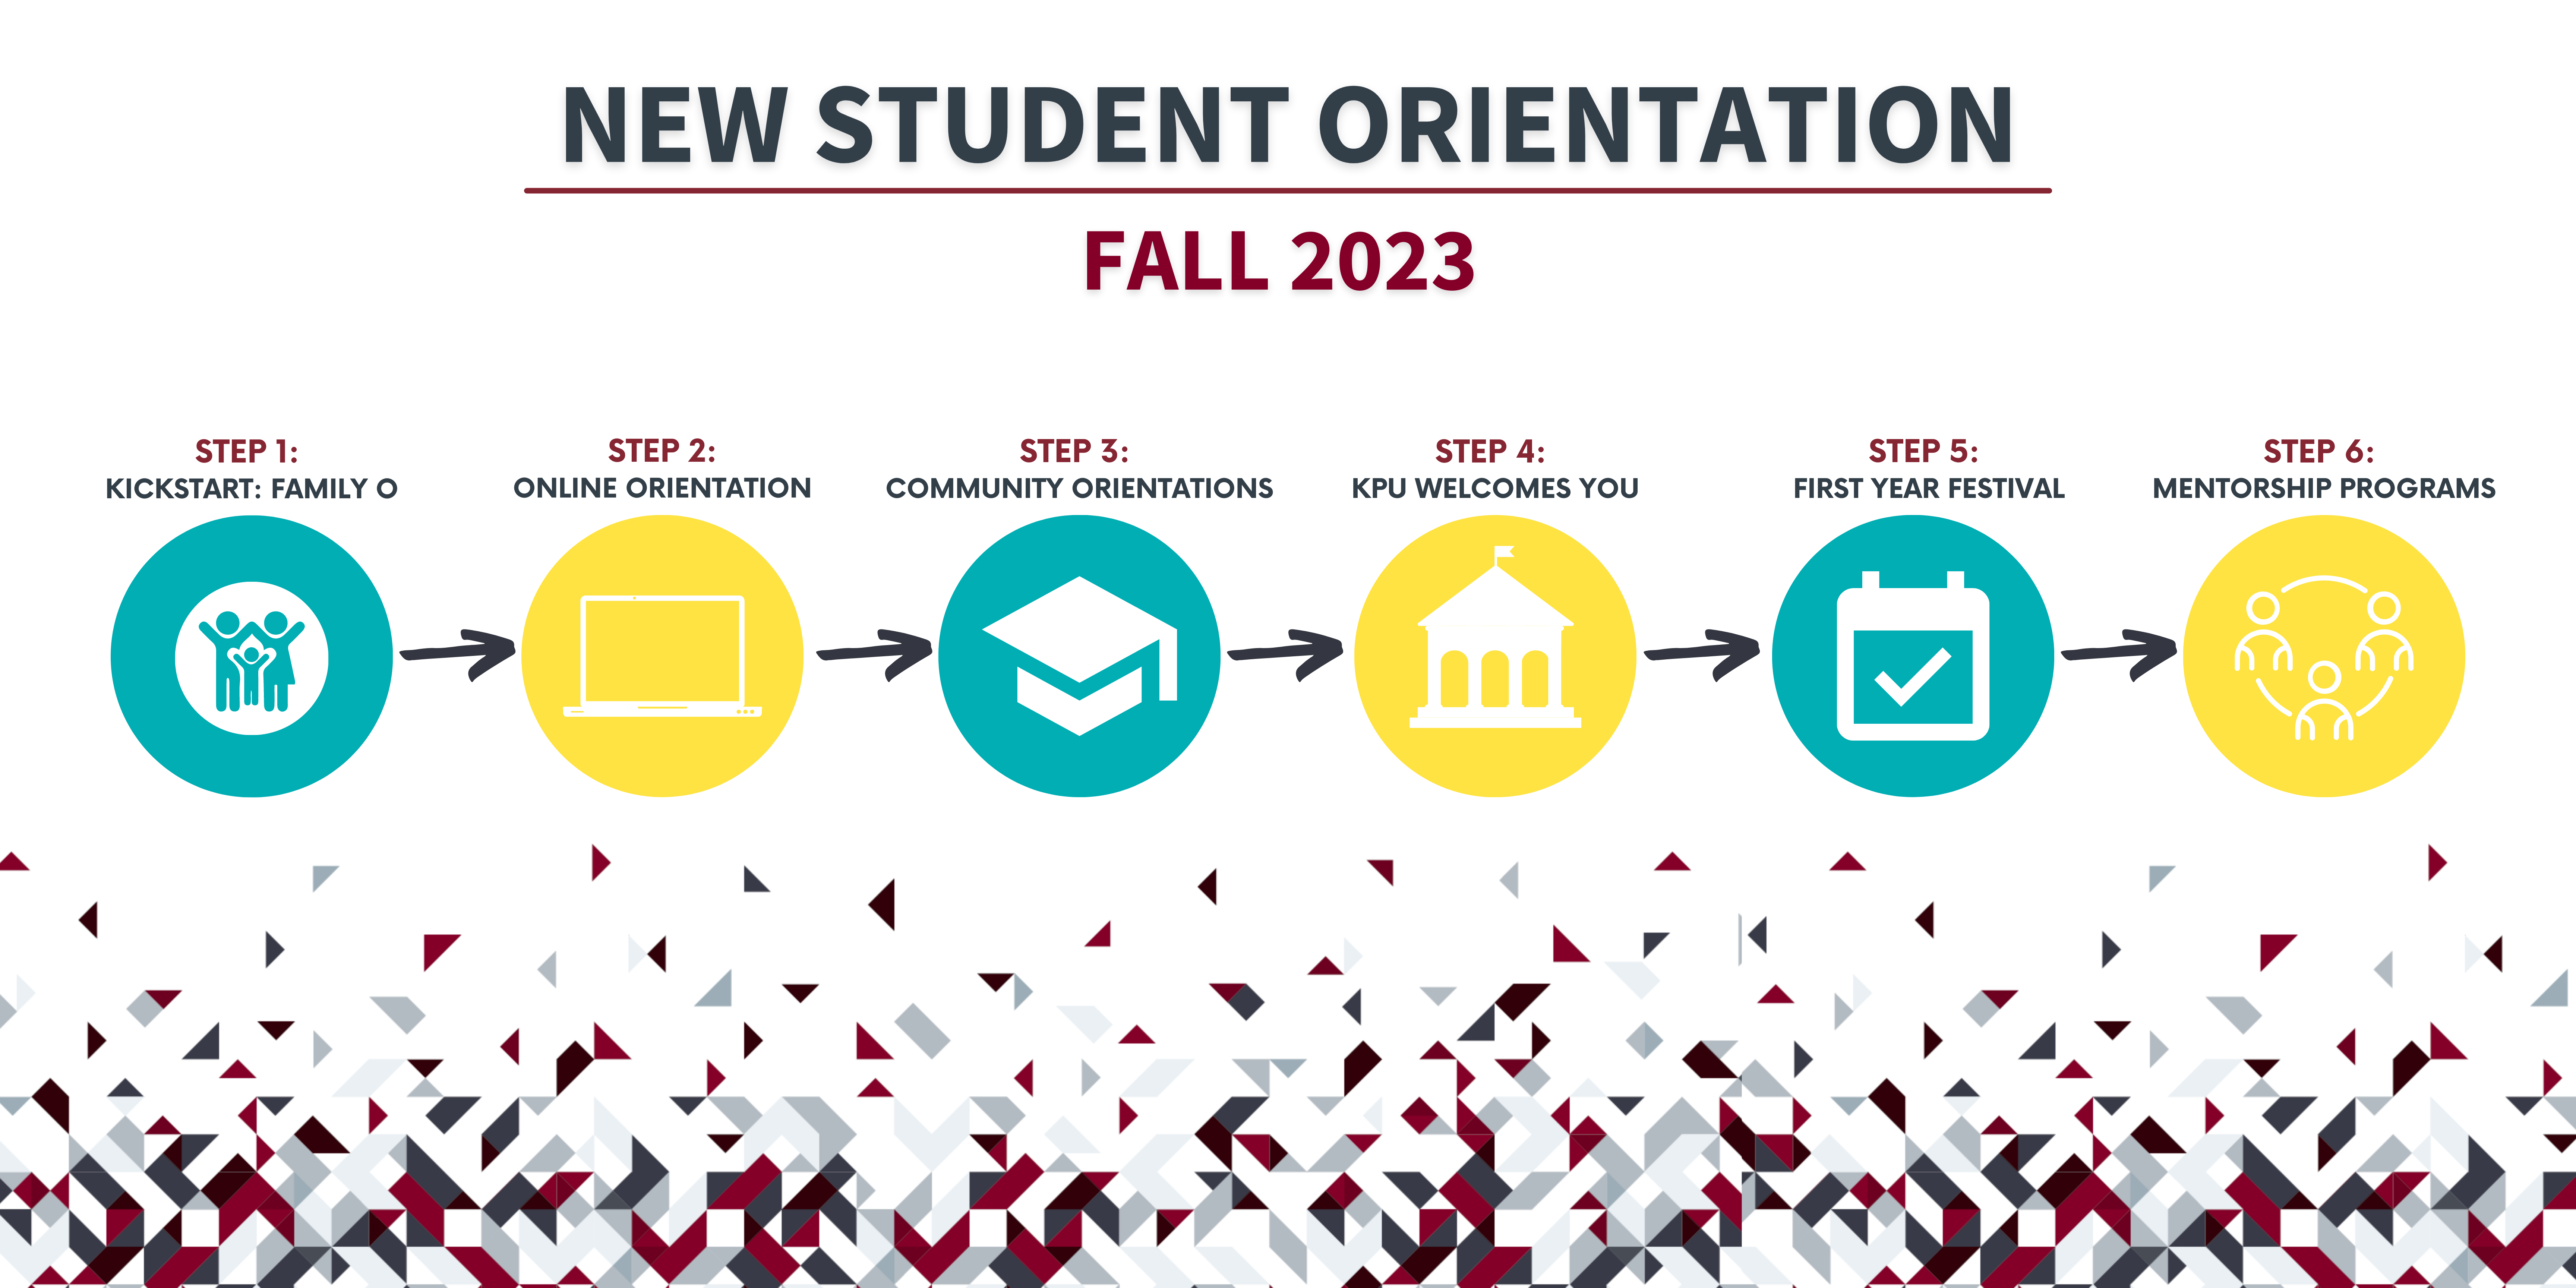 Next Steps for New Students Fall 2023